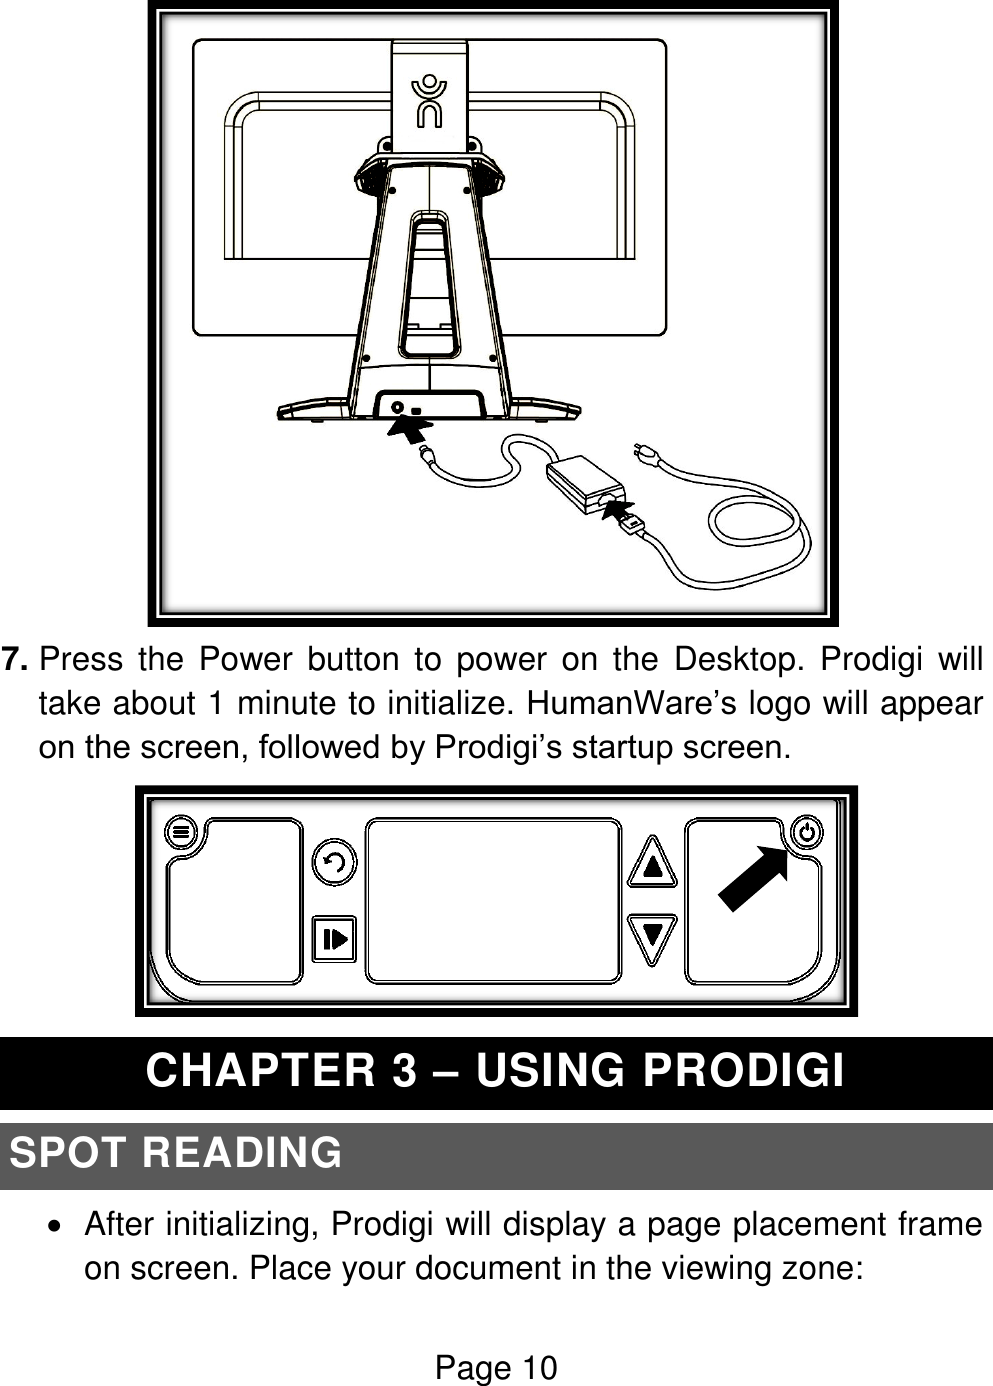 Page 10   7. Press  the  Power  button to  power on the  Desktop. Prodigi  will take about 1 minute to initialize. HumanWare’s logo will appear on the screen, followed by Prodigi’s startup screen.  CHAPTER 3 – USING PRODIGI SPOT READING   After initializing, Prodigi will display a page placement frame on screen. Place your document in the viewing zone: 